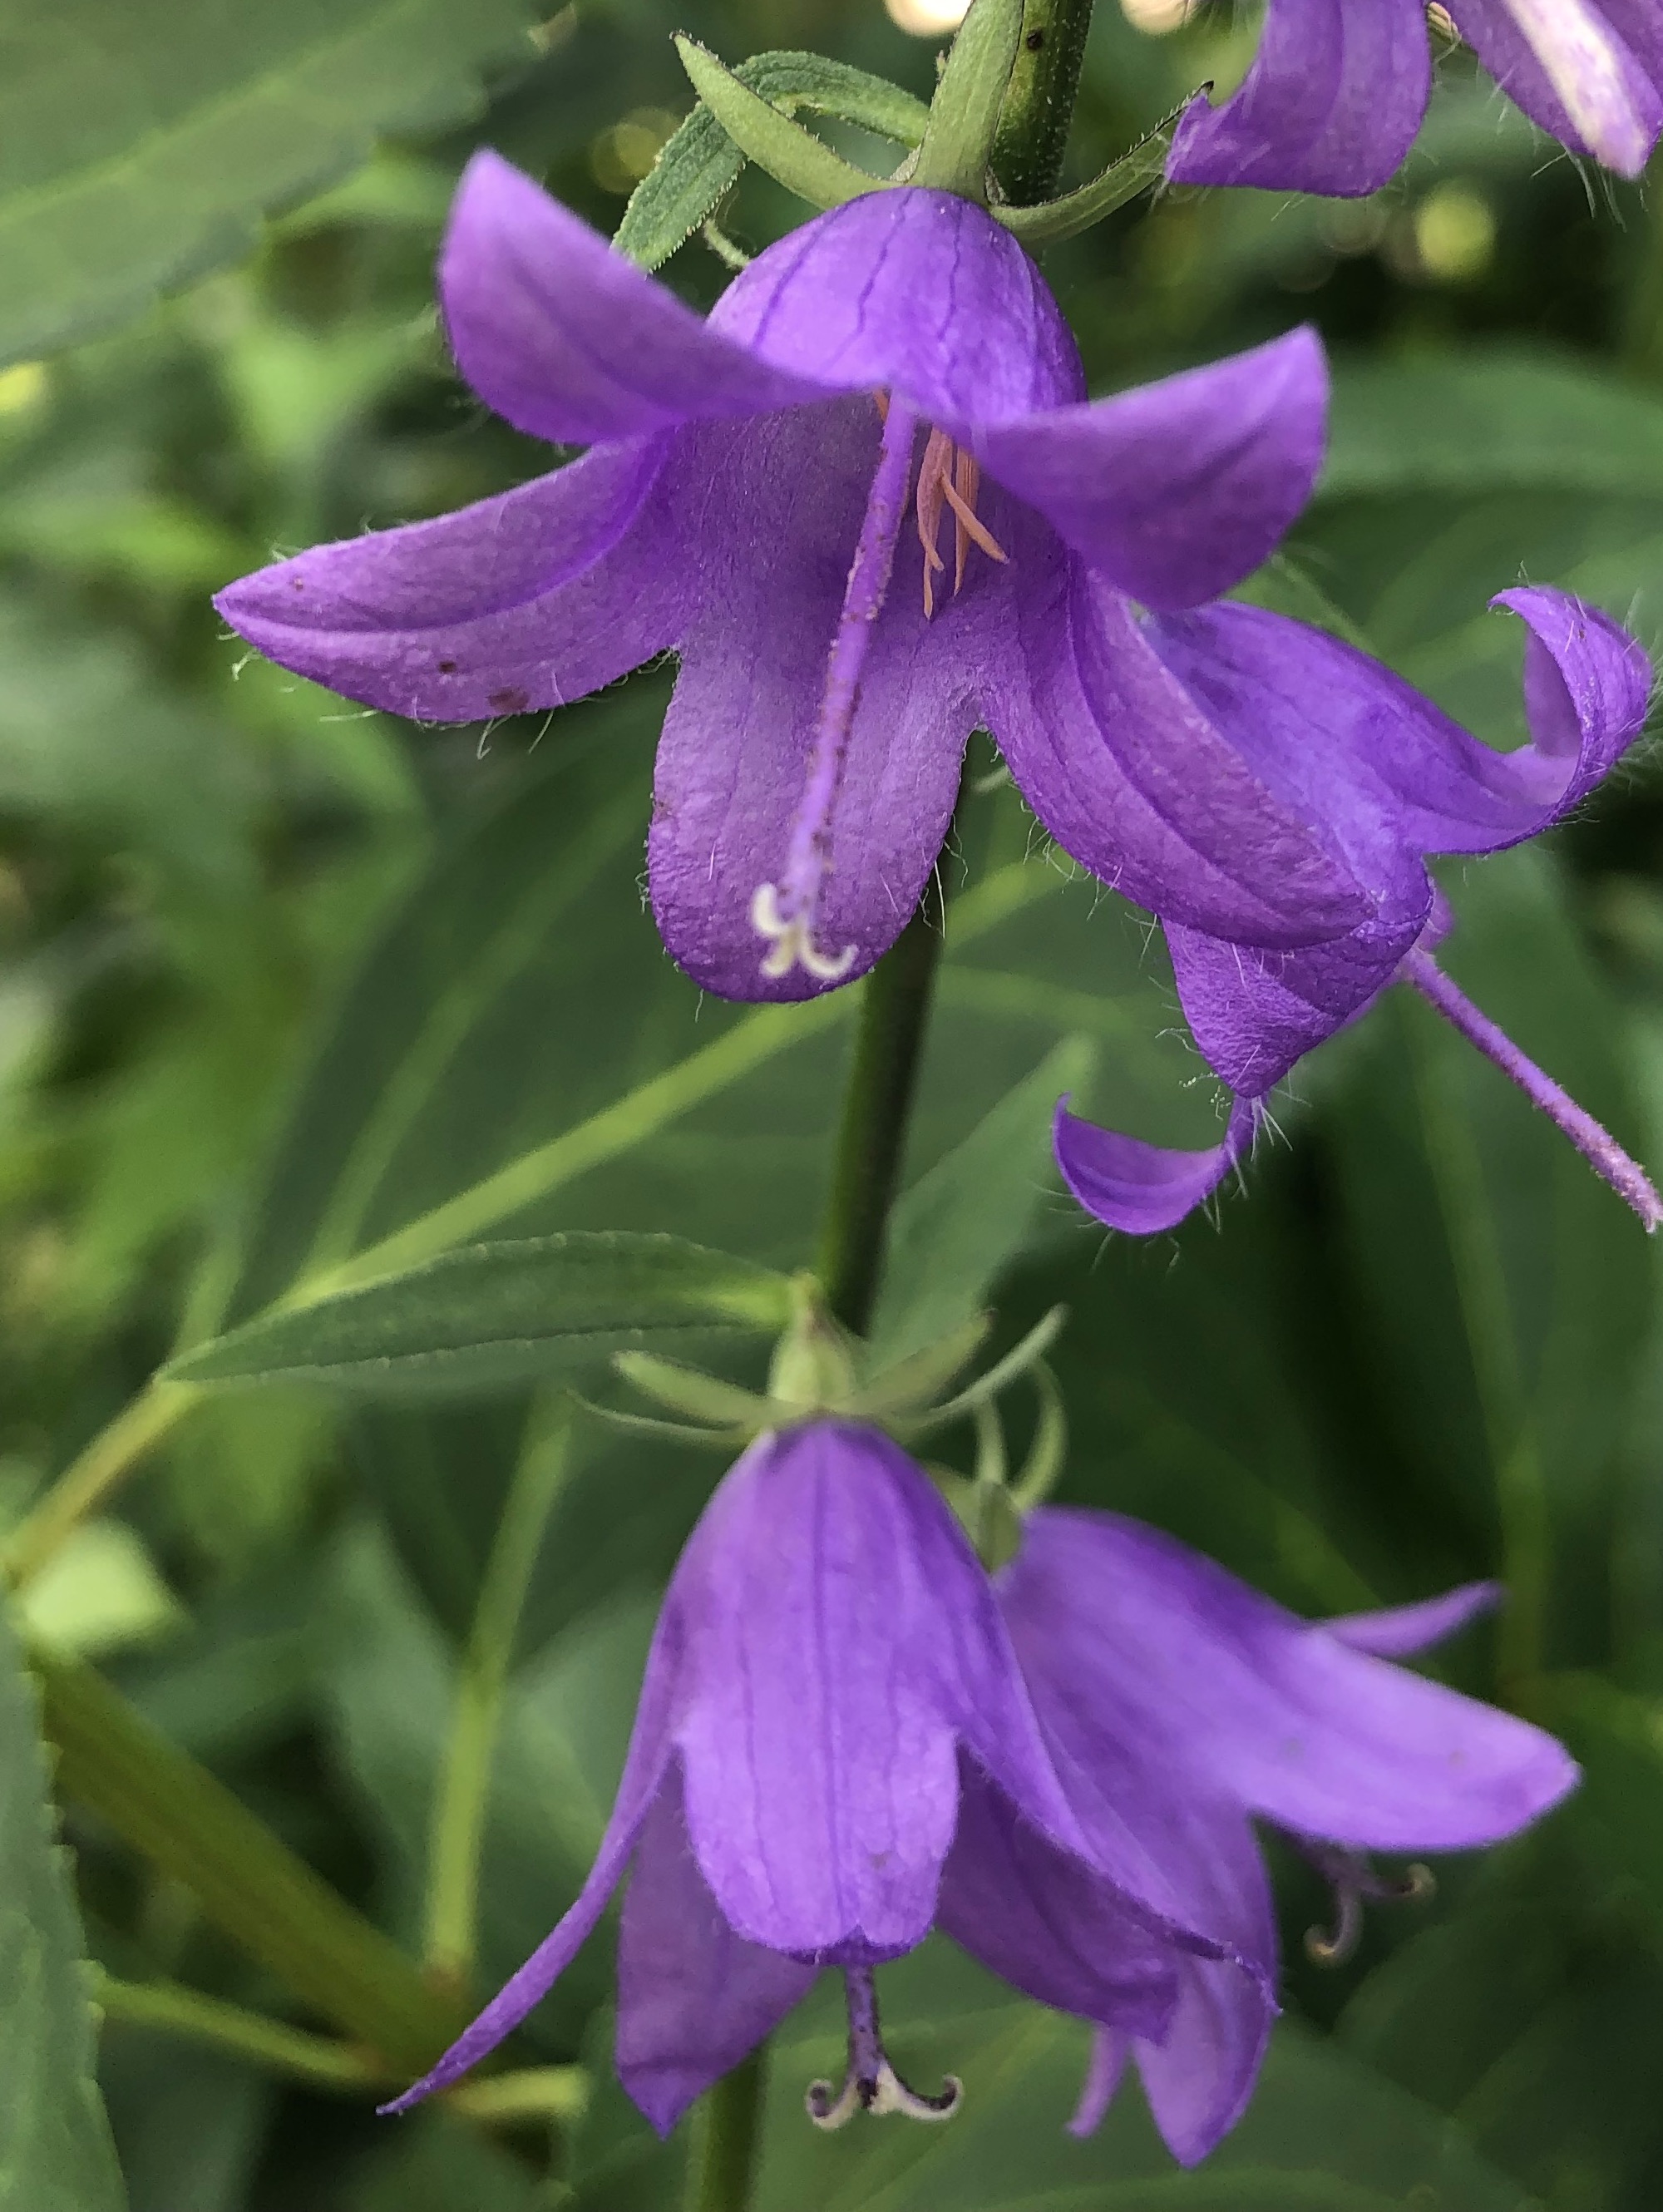 Creeping Bellflower at Thoreau in Madison, Wisconsin on July 3, 2021.